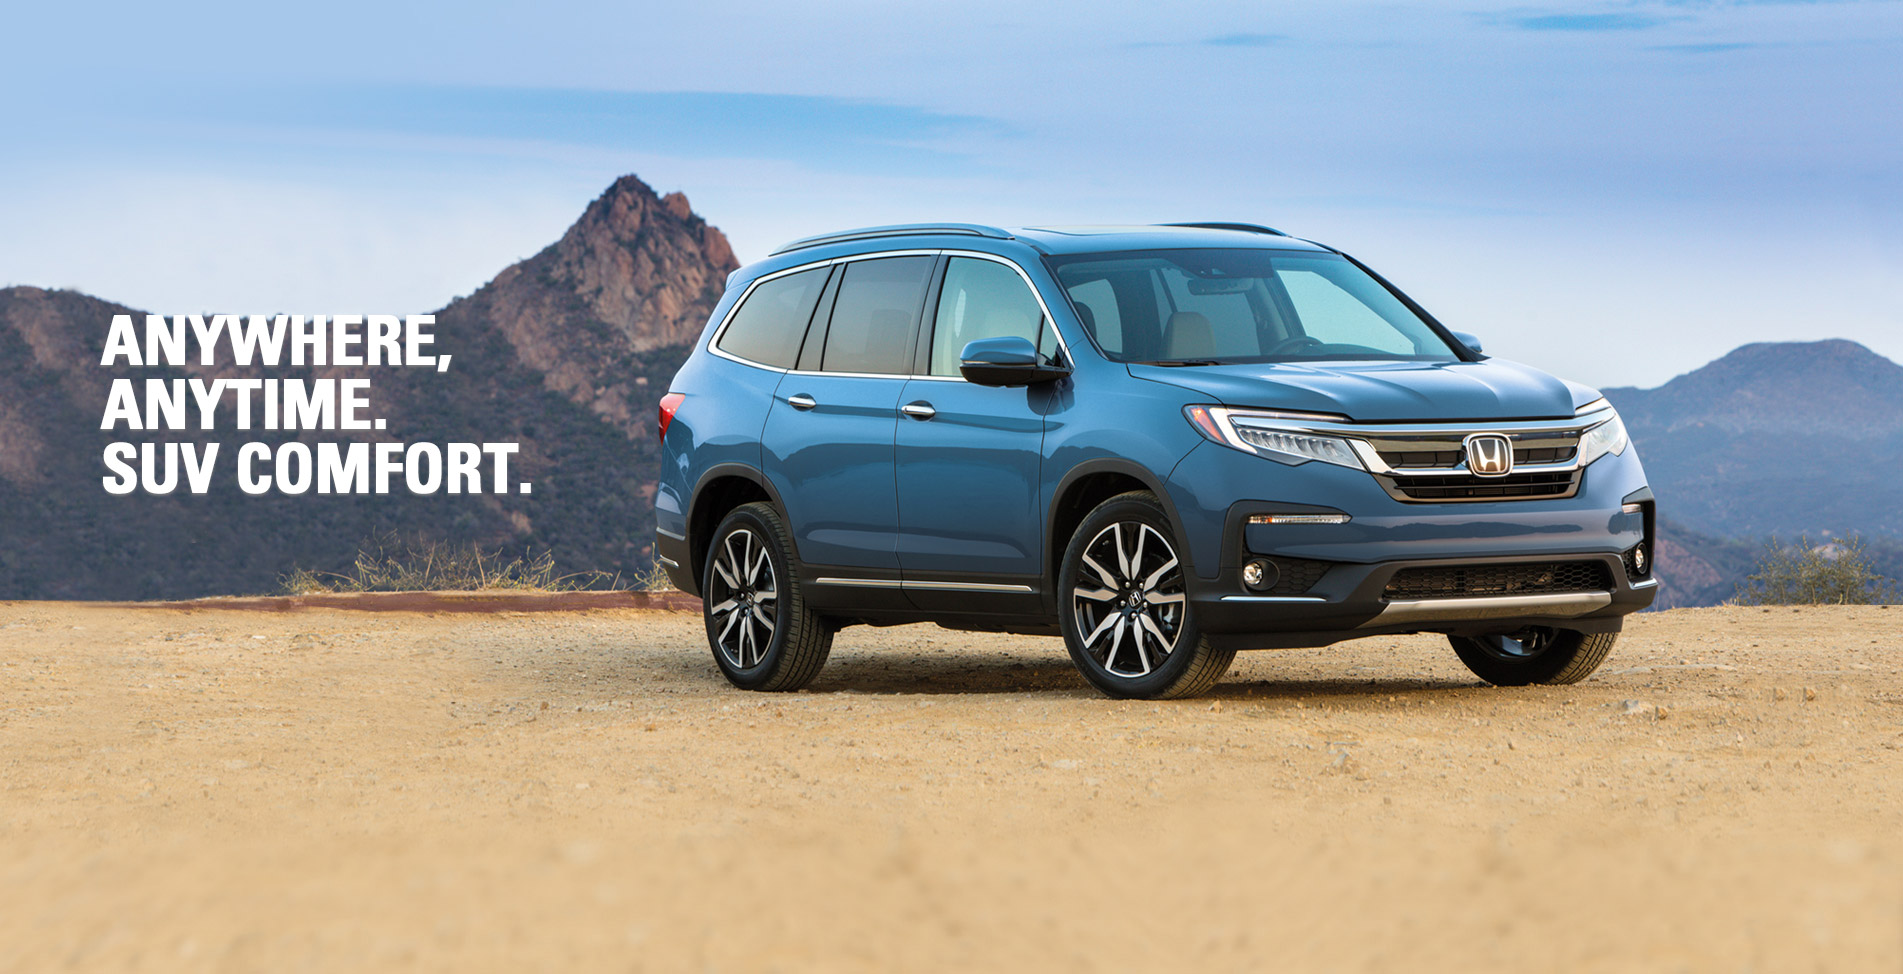 Five Reasons You Should Buy The Honda Pilot For Your Family